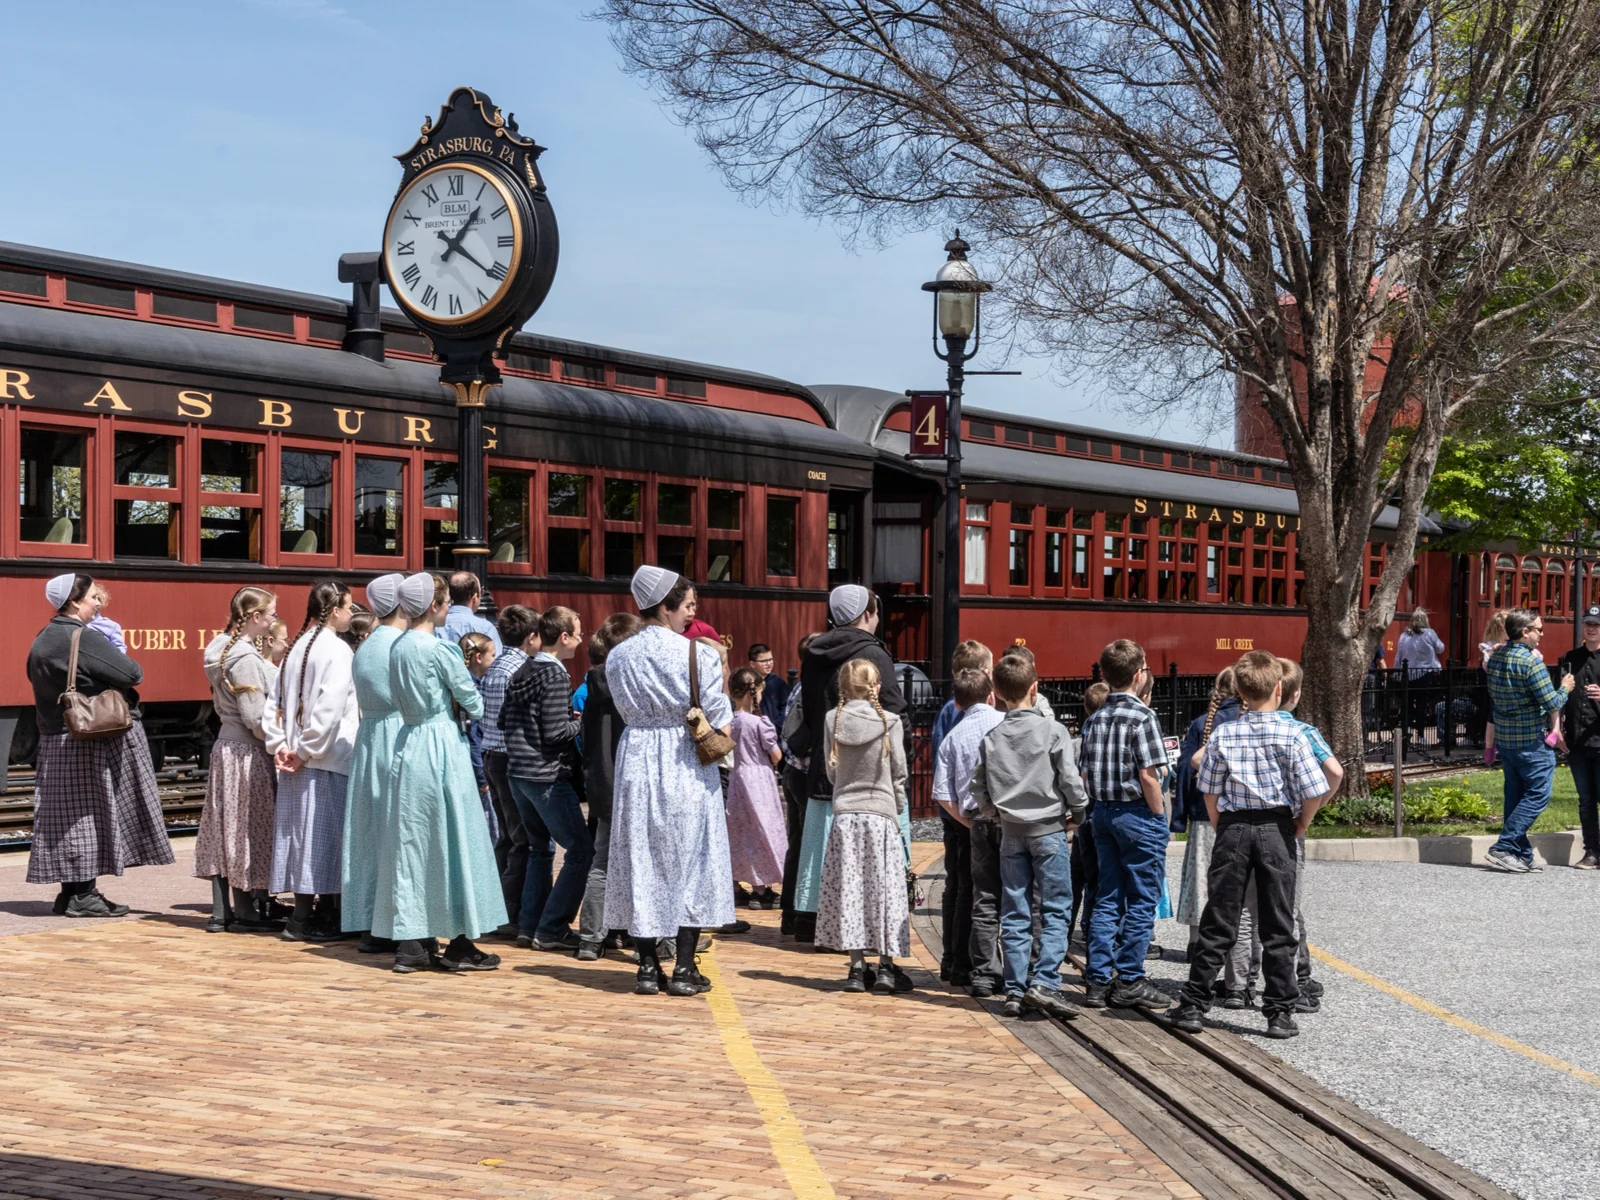 A group of Mennonite Women and children waiting for ride on one of the best things to do in Pennsylvania, the Strasburg Rail Road with red and black paint